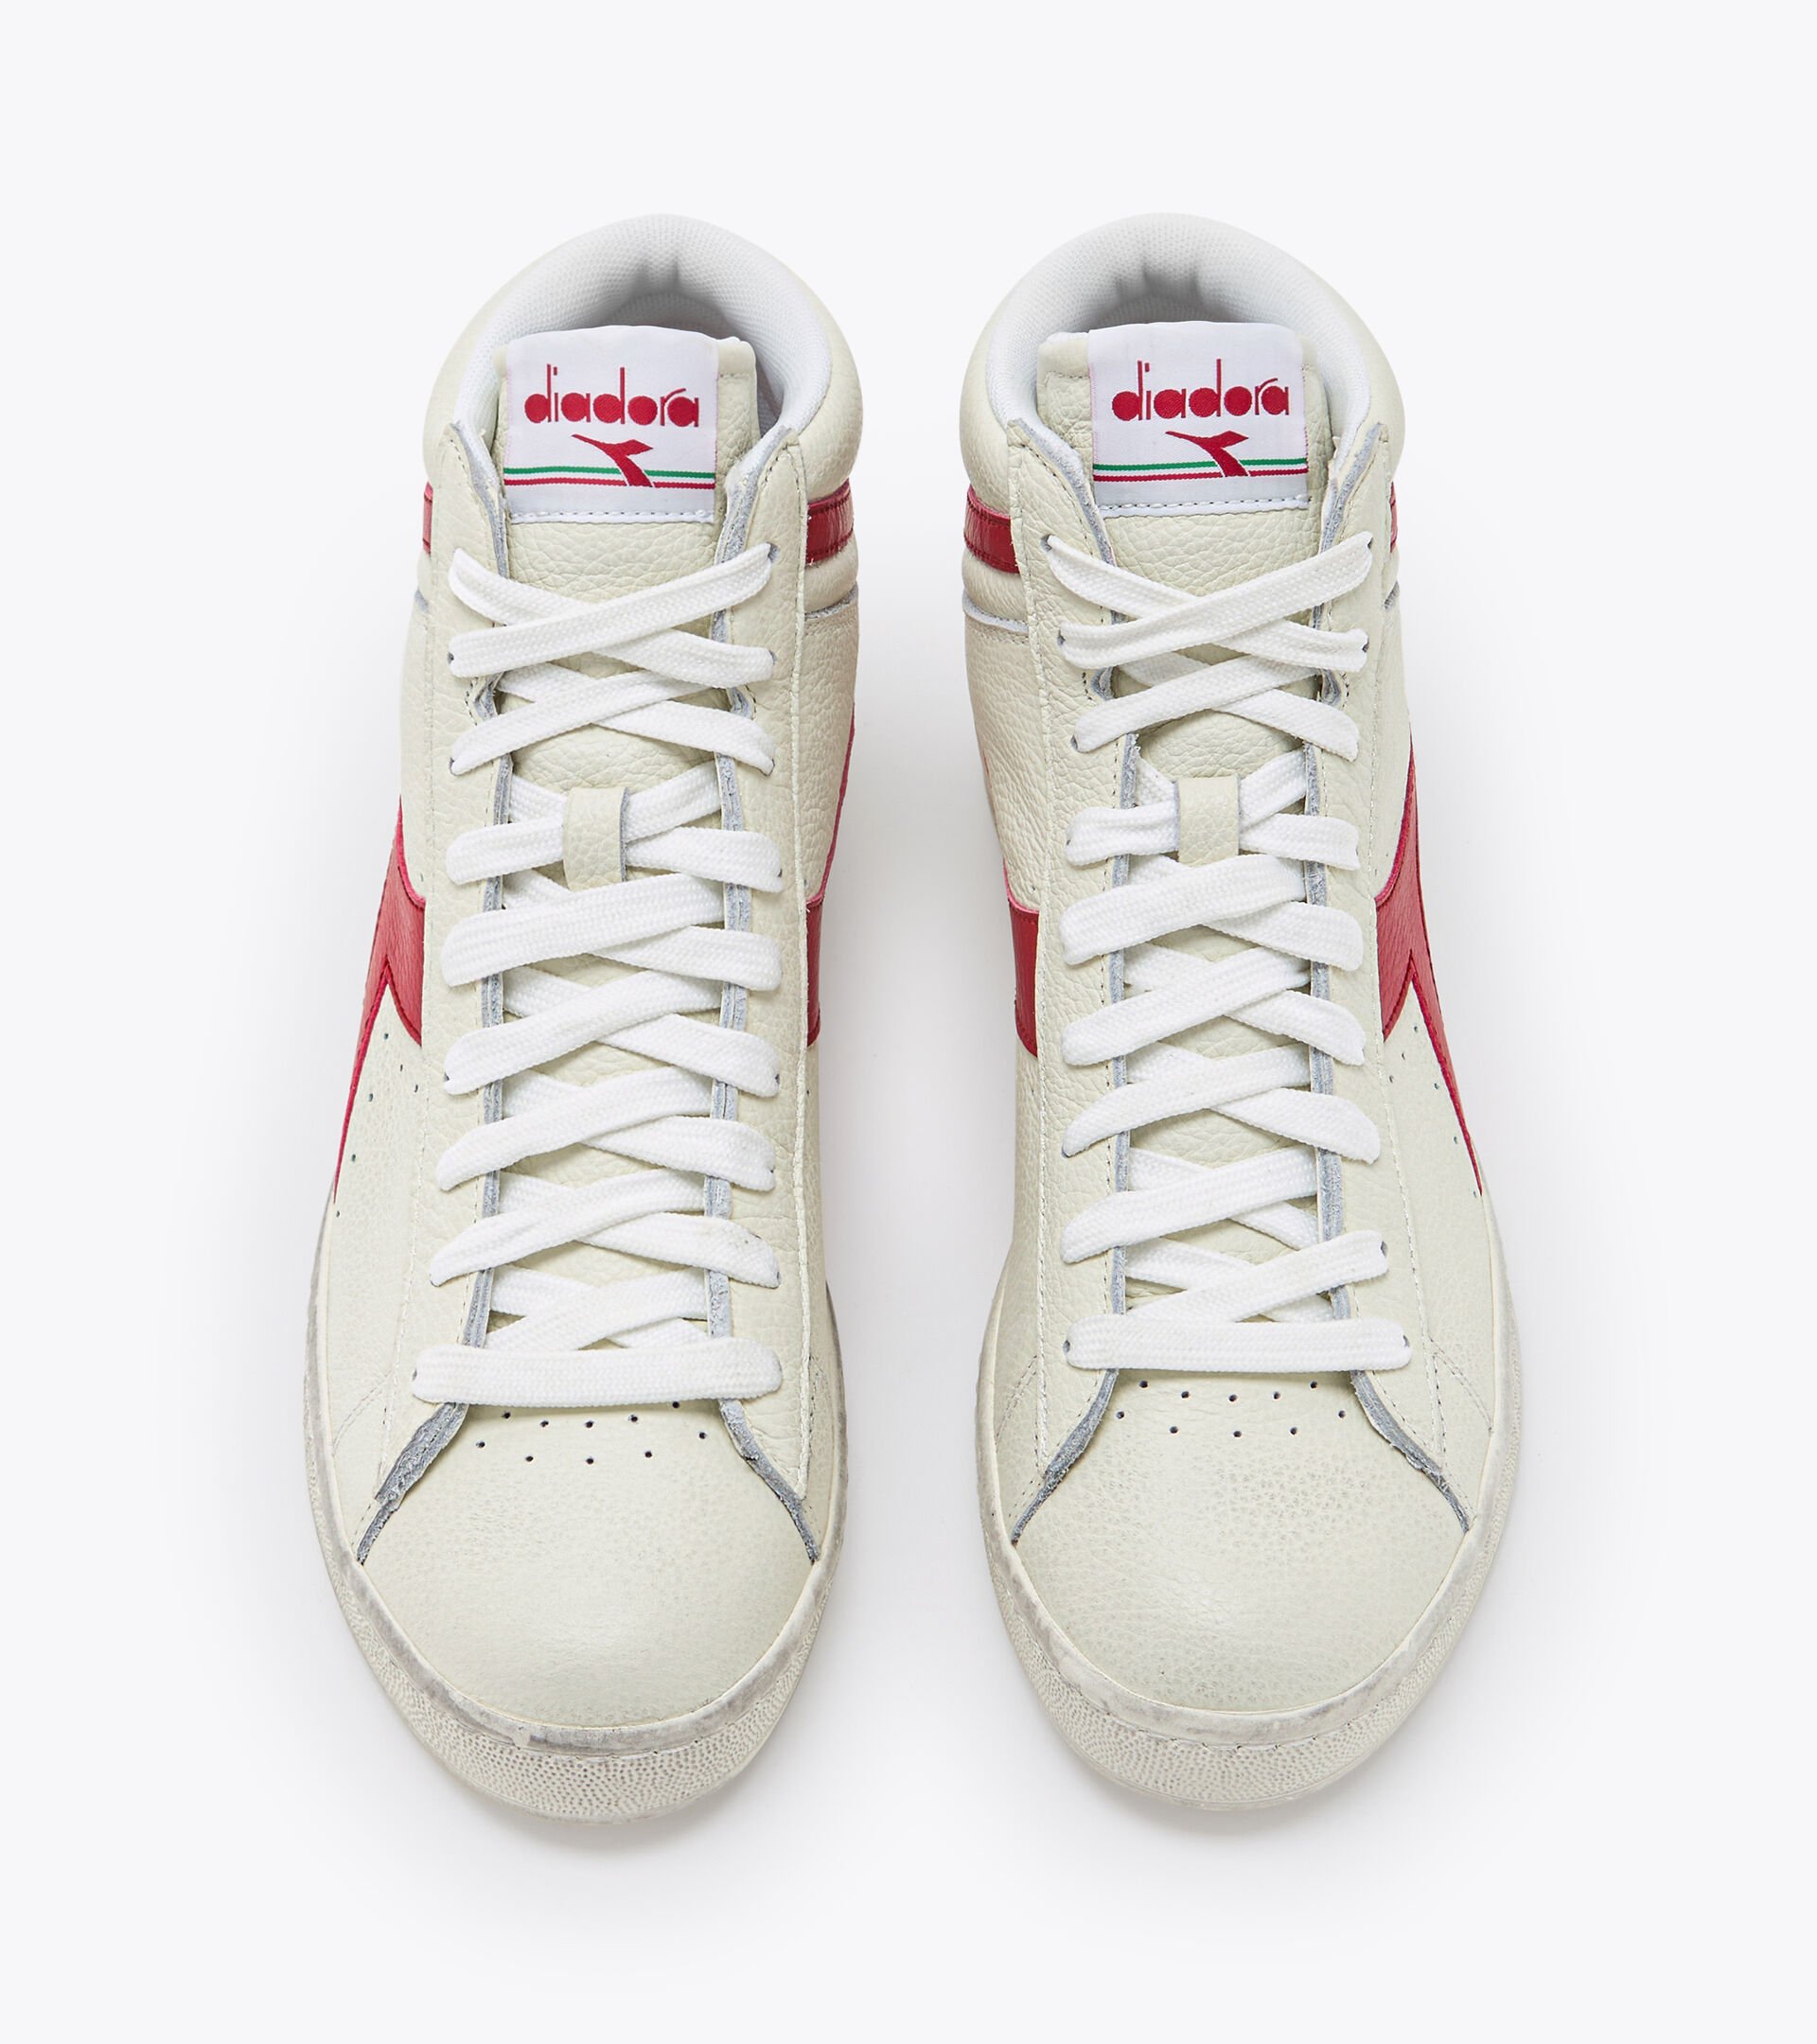 Sporty sneakers - Gender neutral GAME L HIGH WAXED WHITE/RED PEPPER - Diadora